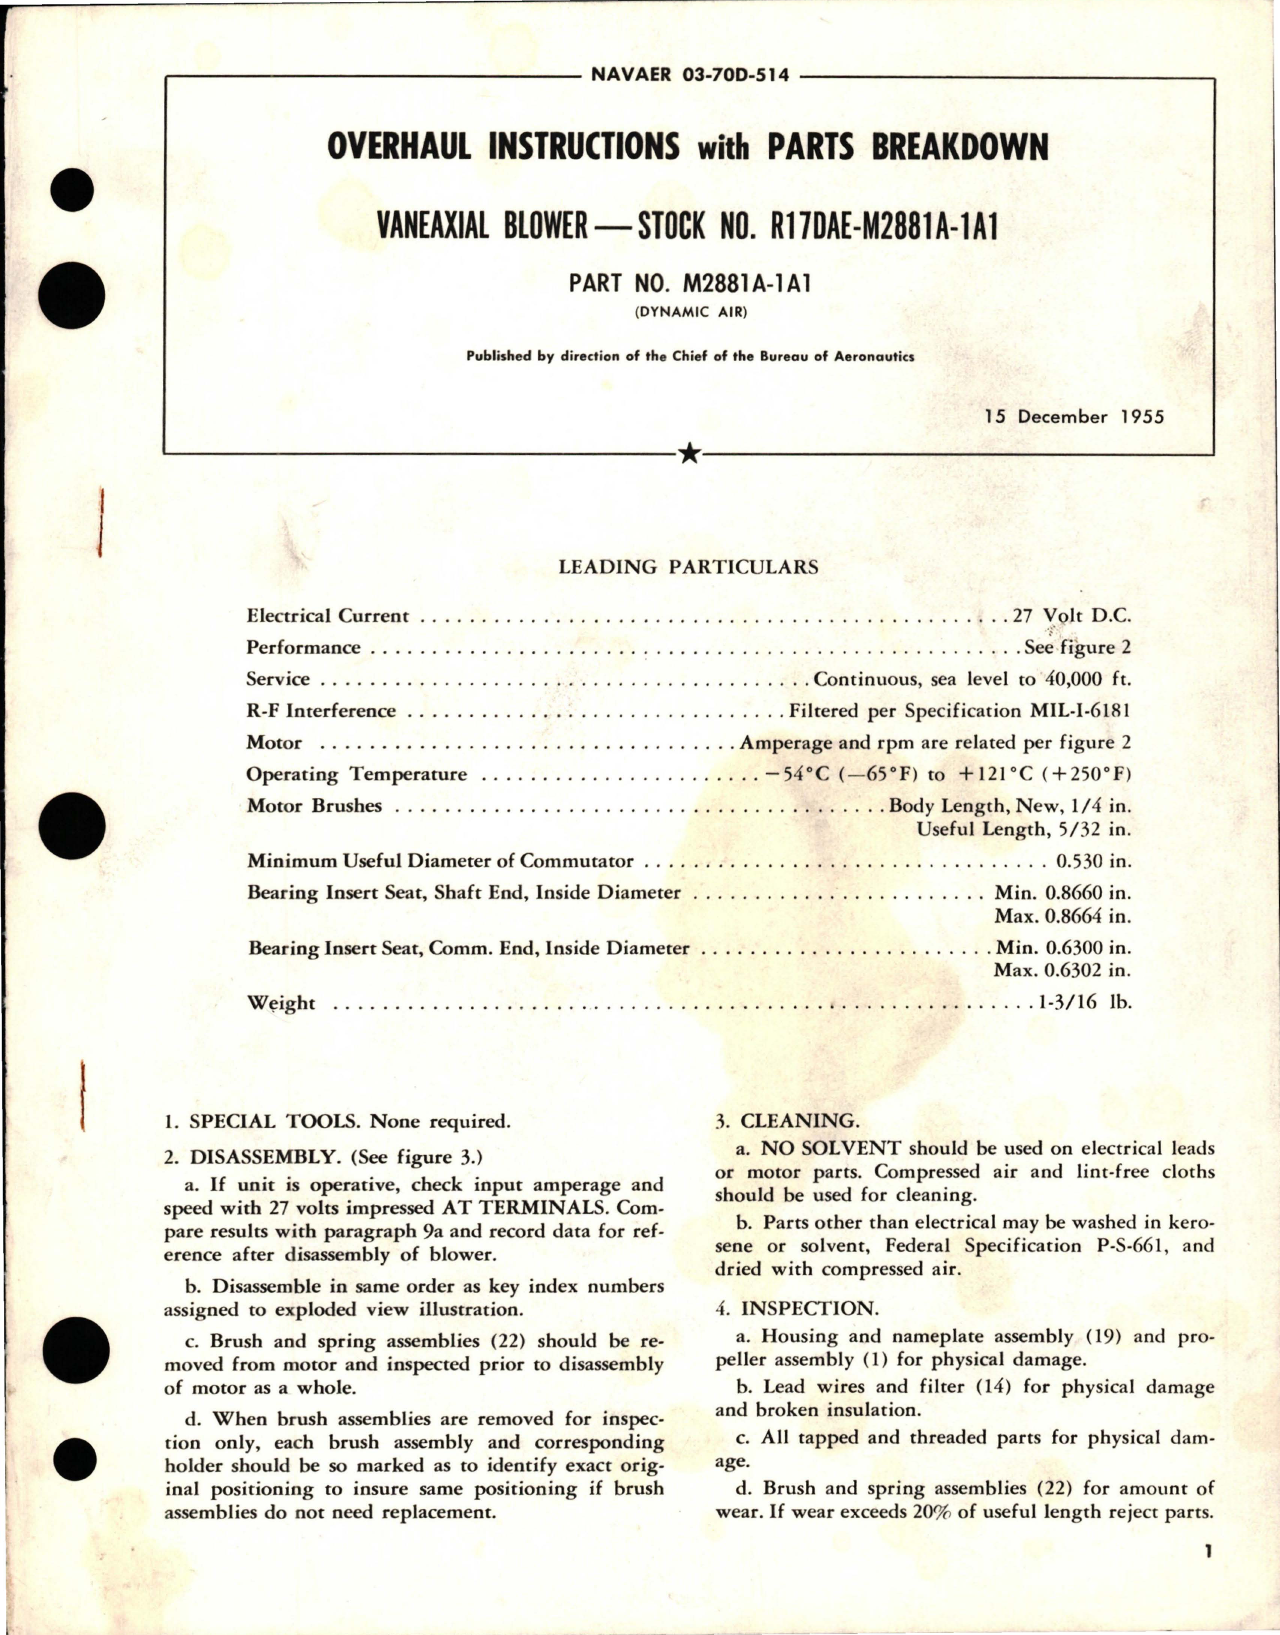 Sample page 1 from AirCorps Library document: Overhaul Instructions with Parts Breakdown for Vaneaxial Blower - Part M2881A-1A1